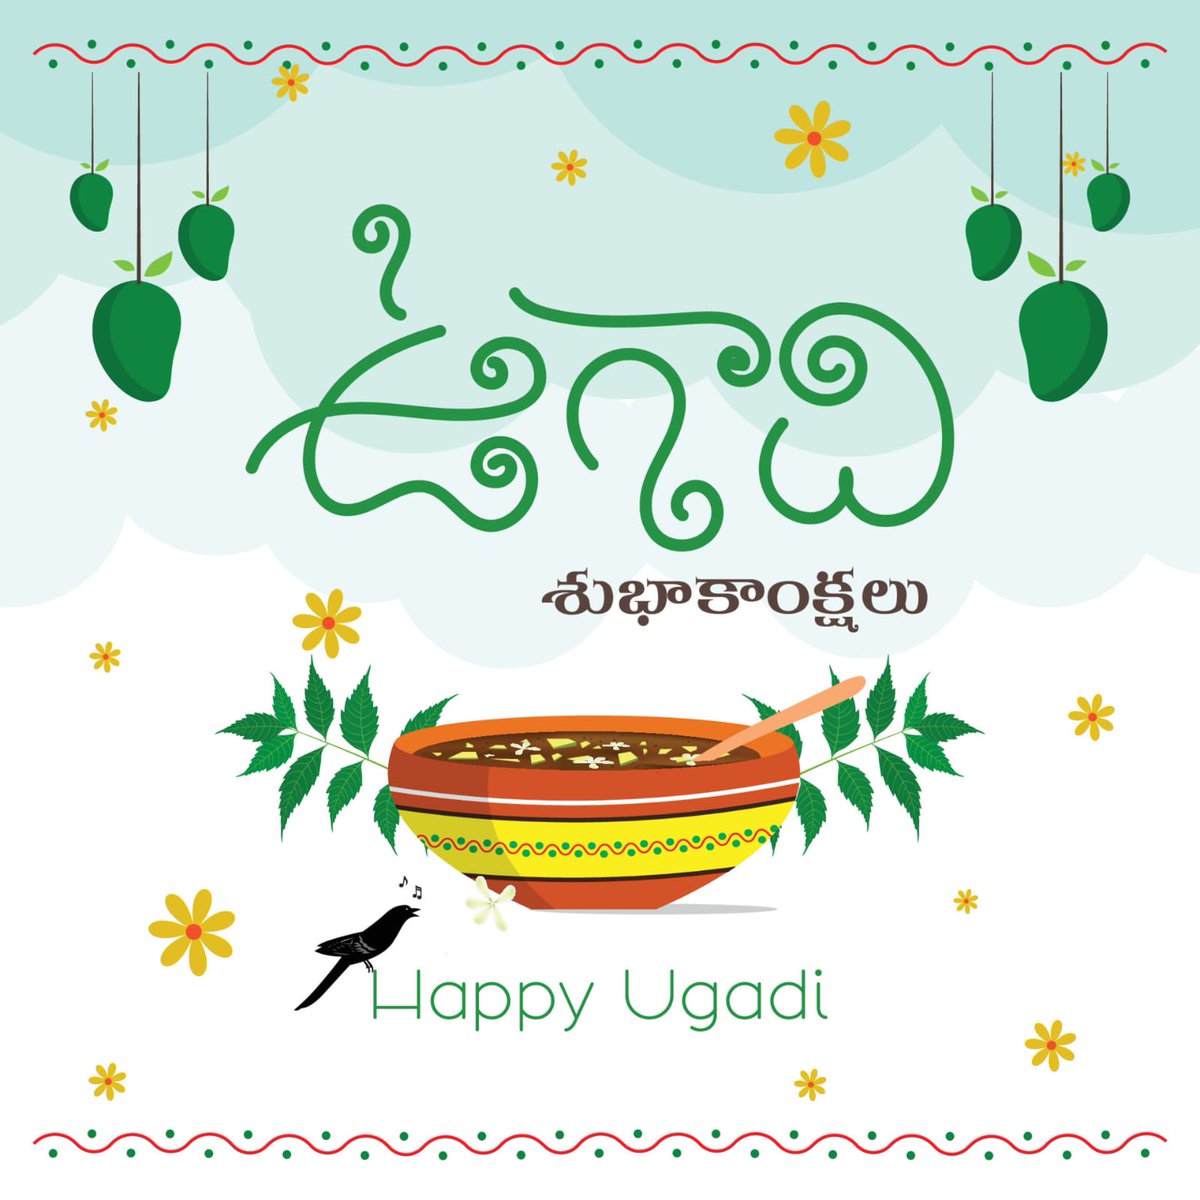 On this auspicious occasion. Here's wishing you good health and prosperity. May the coming year bring you all the happiness. May success be all yours... I sincerly wish that may all your dreams come true.. Wish you a prosperous Ugadi! #HappyUgadi 🙏😊